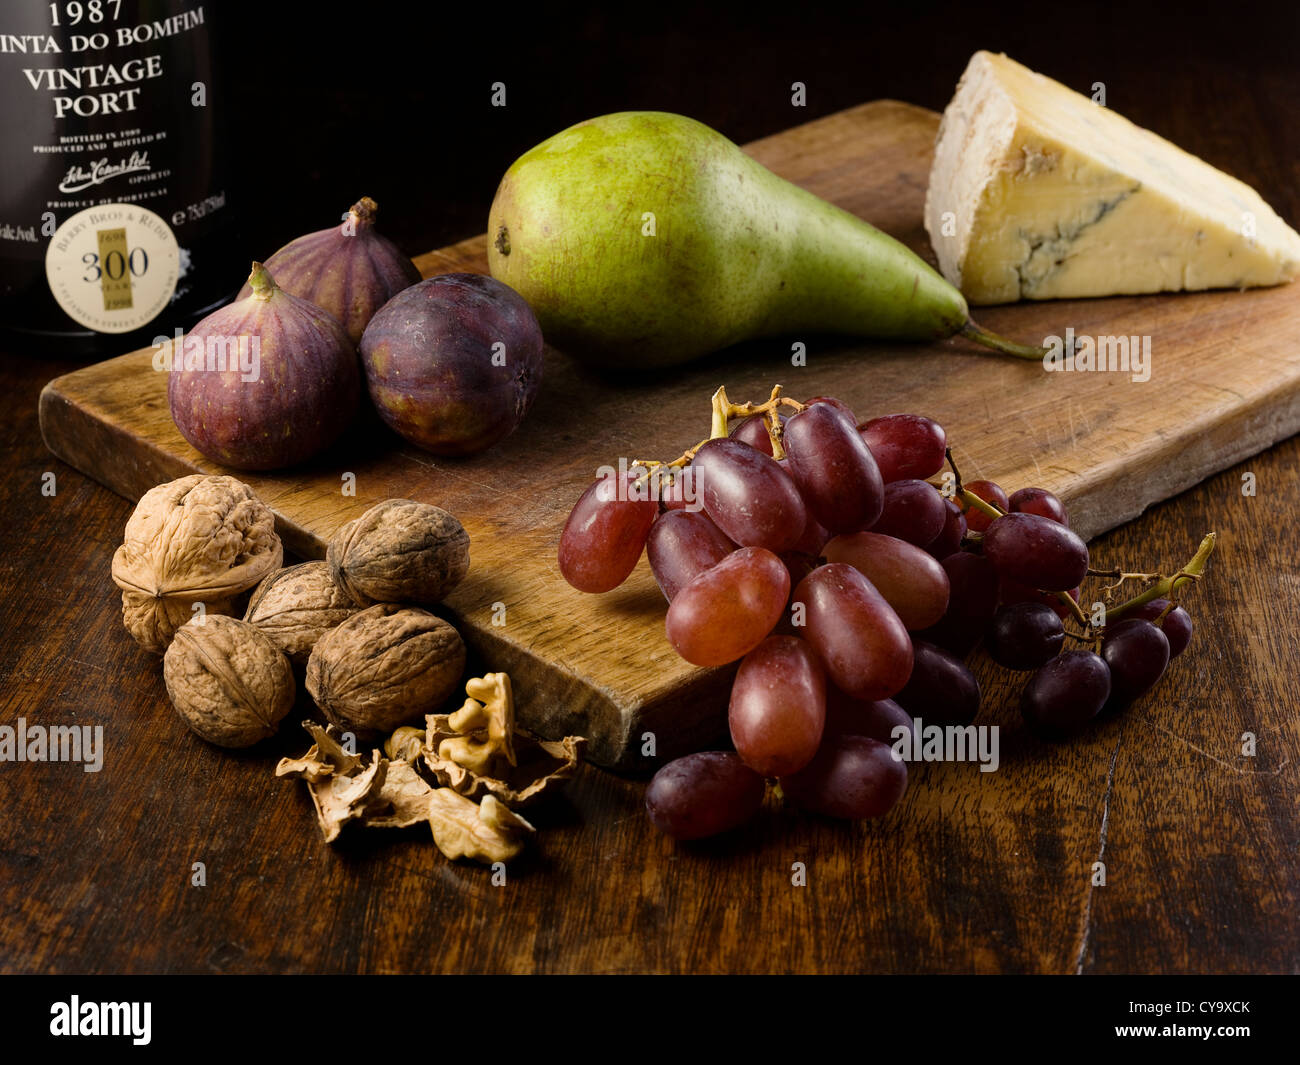 Cheese board with Port wine, Pear, Grapes, Figs and Walnuts on a chopping board. Stock Photo